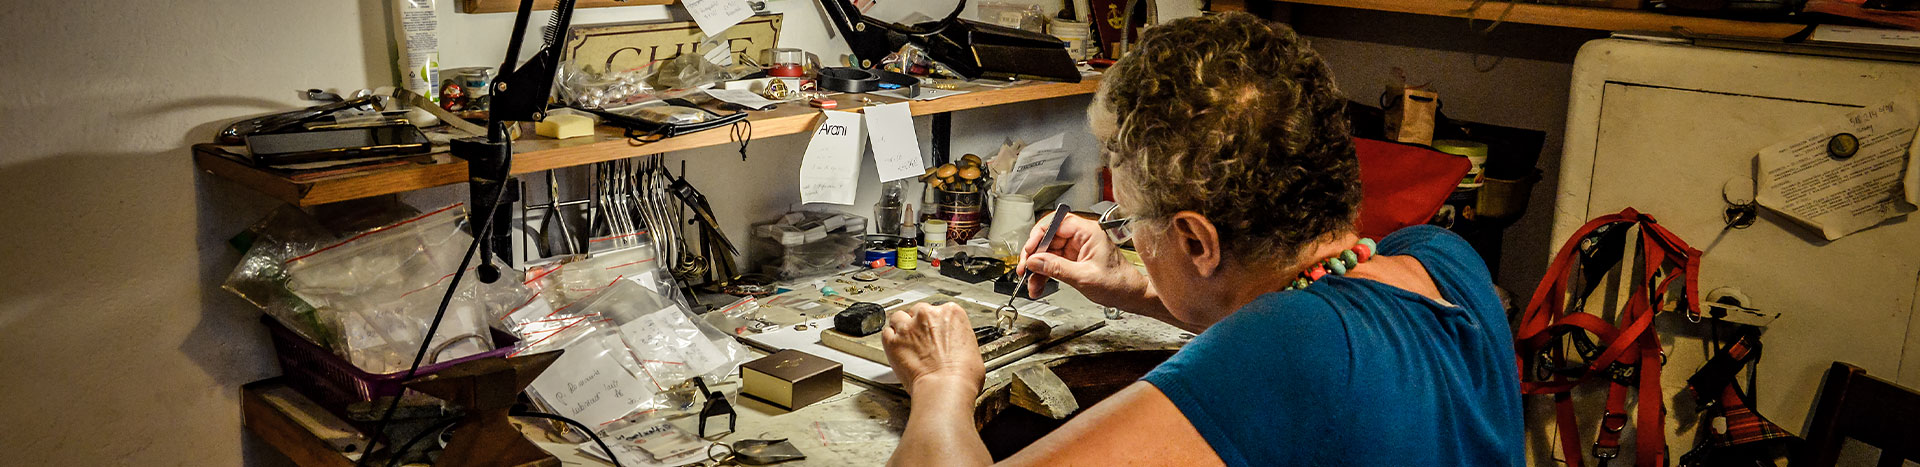 The photograph shows Małgorzata Kupiec, who is sitting at her workstation in the studio and working with her jewelry. You can see various tools, jewelry and stones. You can also see binders on the right side and a corkboard with various postcards and notes above the station. The photo was taken by Dominik Wójcik.